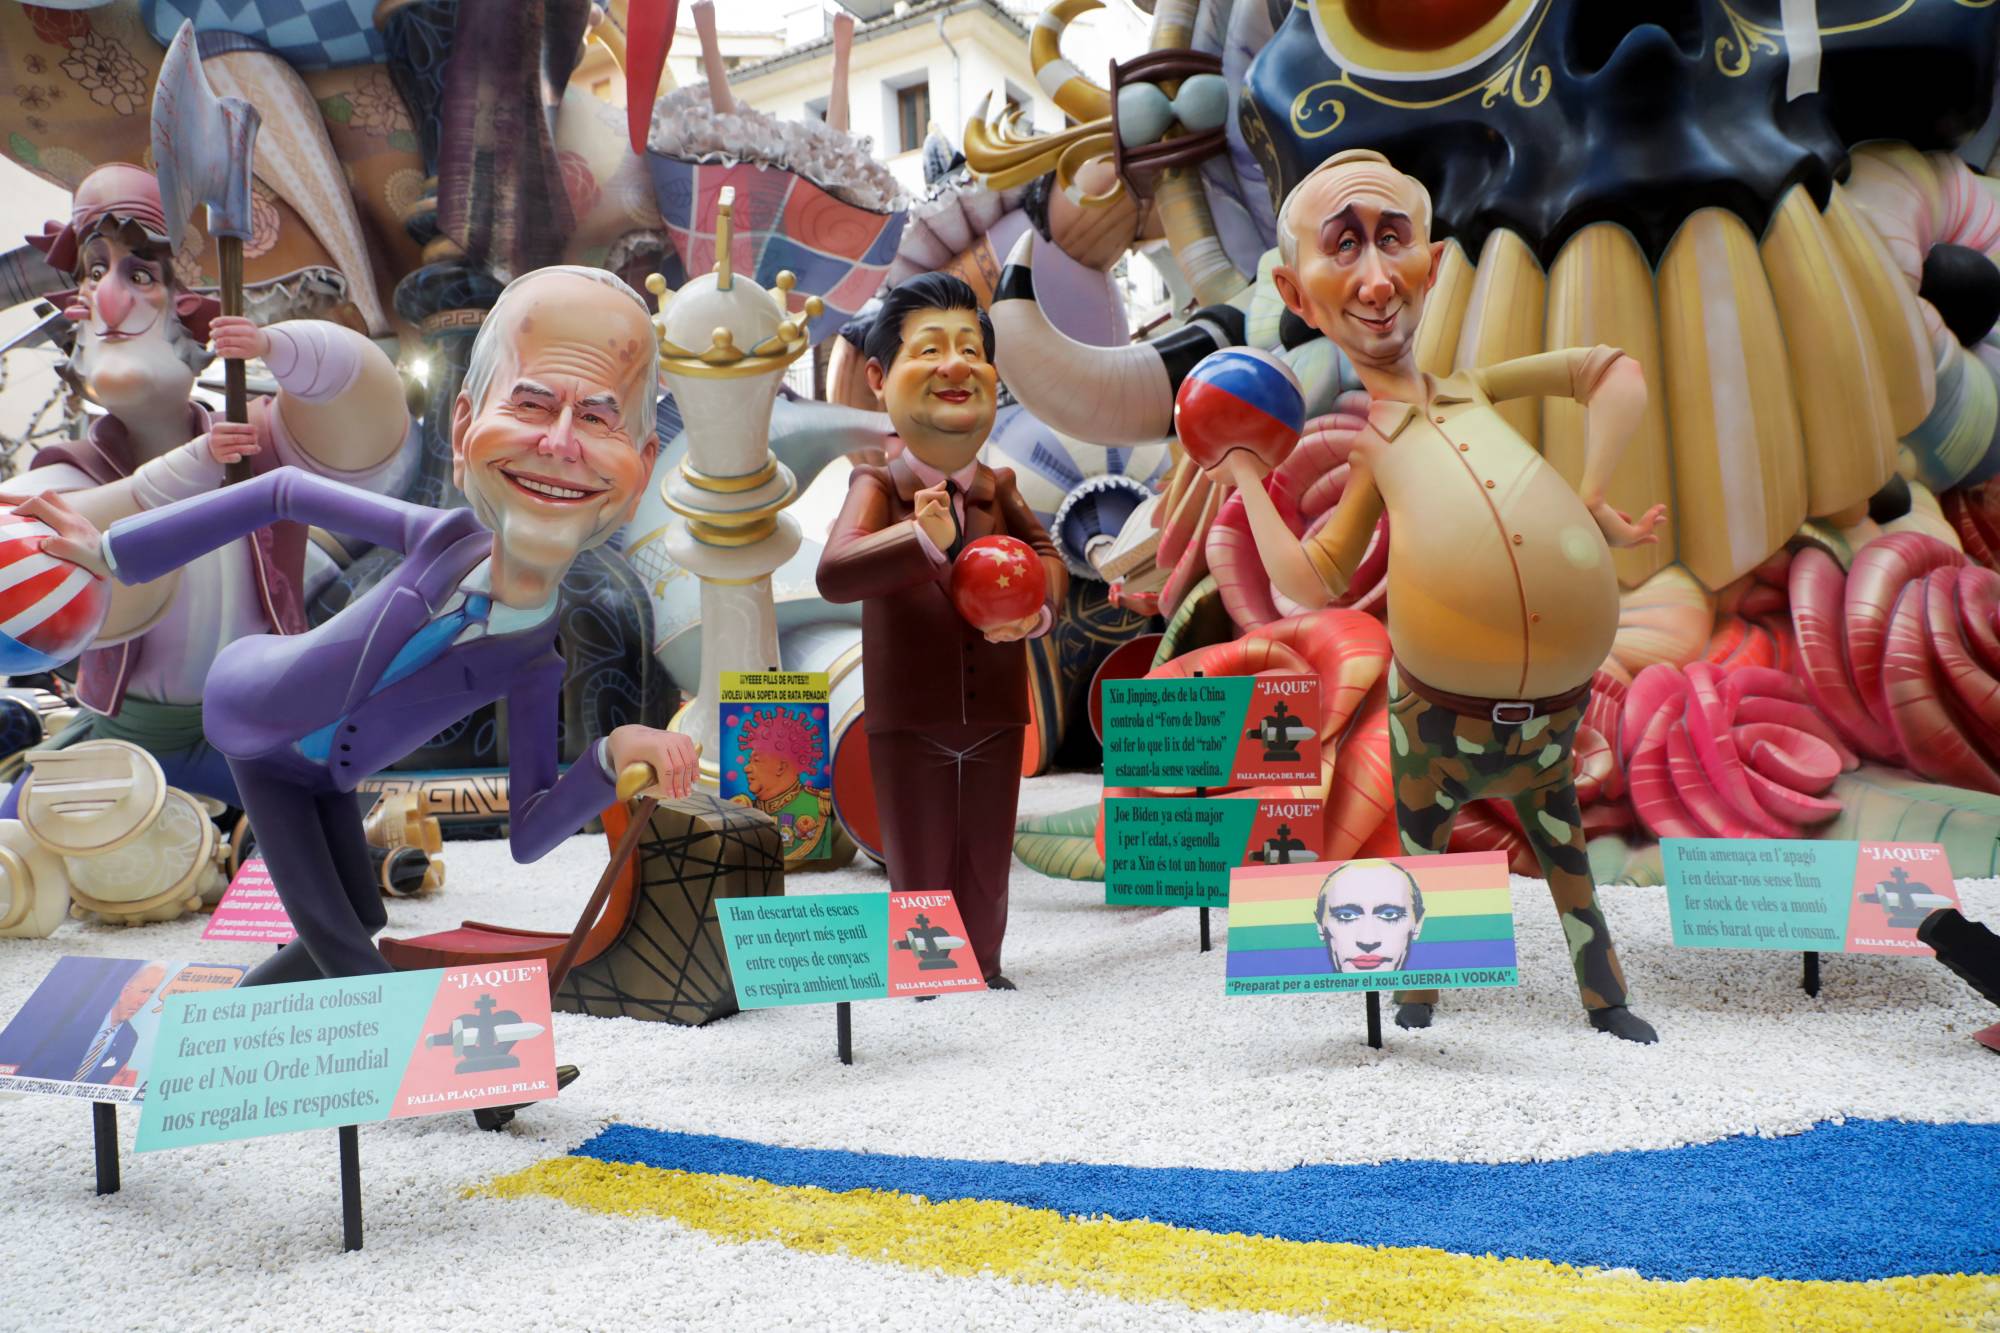 This float at a festival in Spain shows figures depicting U.S. President Joe Biden and his Russian and Chinese counterparts, Vladimir Putin and Xi Jinping, playing a game of bowling with Ukraine in March, shortly after the Russian invasion. | REUTERS